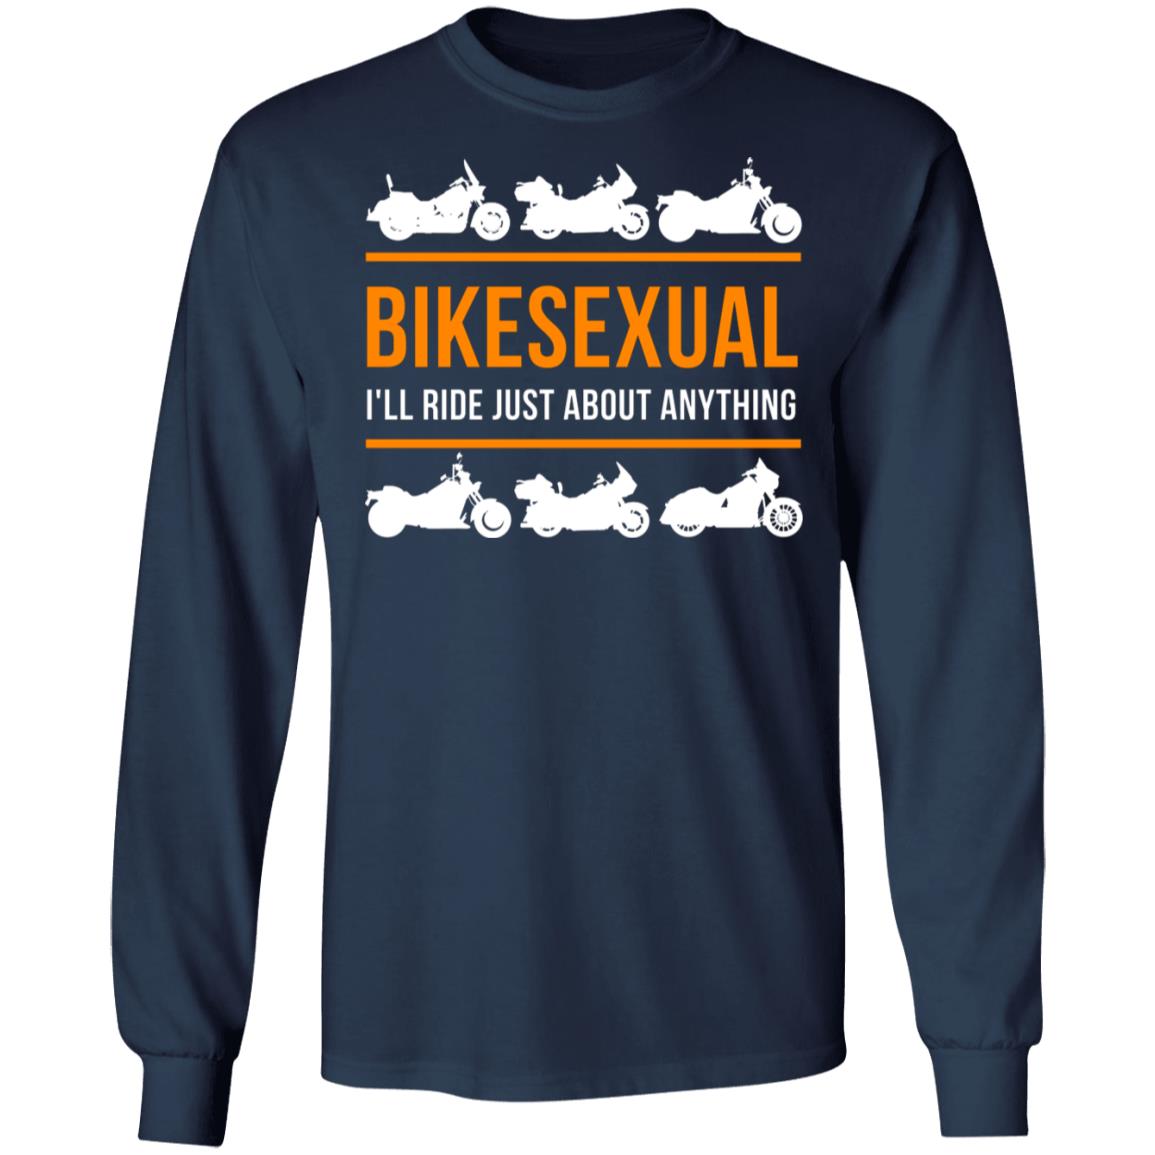 Bikesexual Funny Motorcycle Shirt